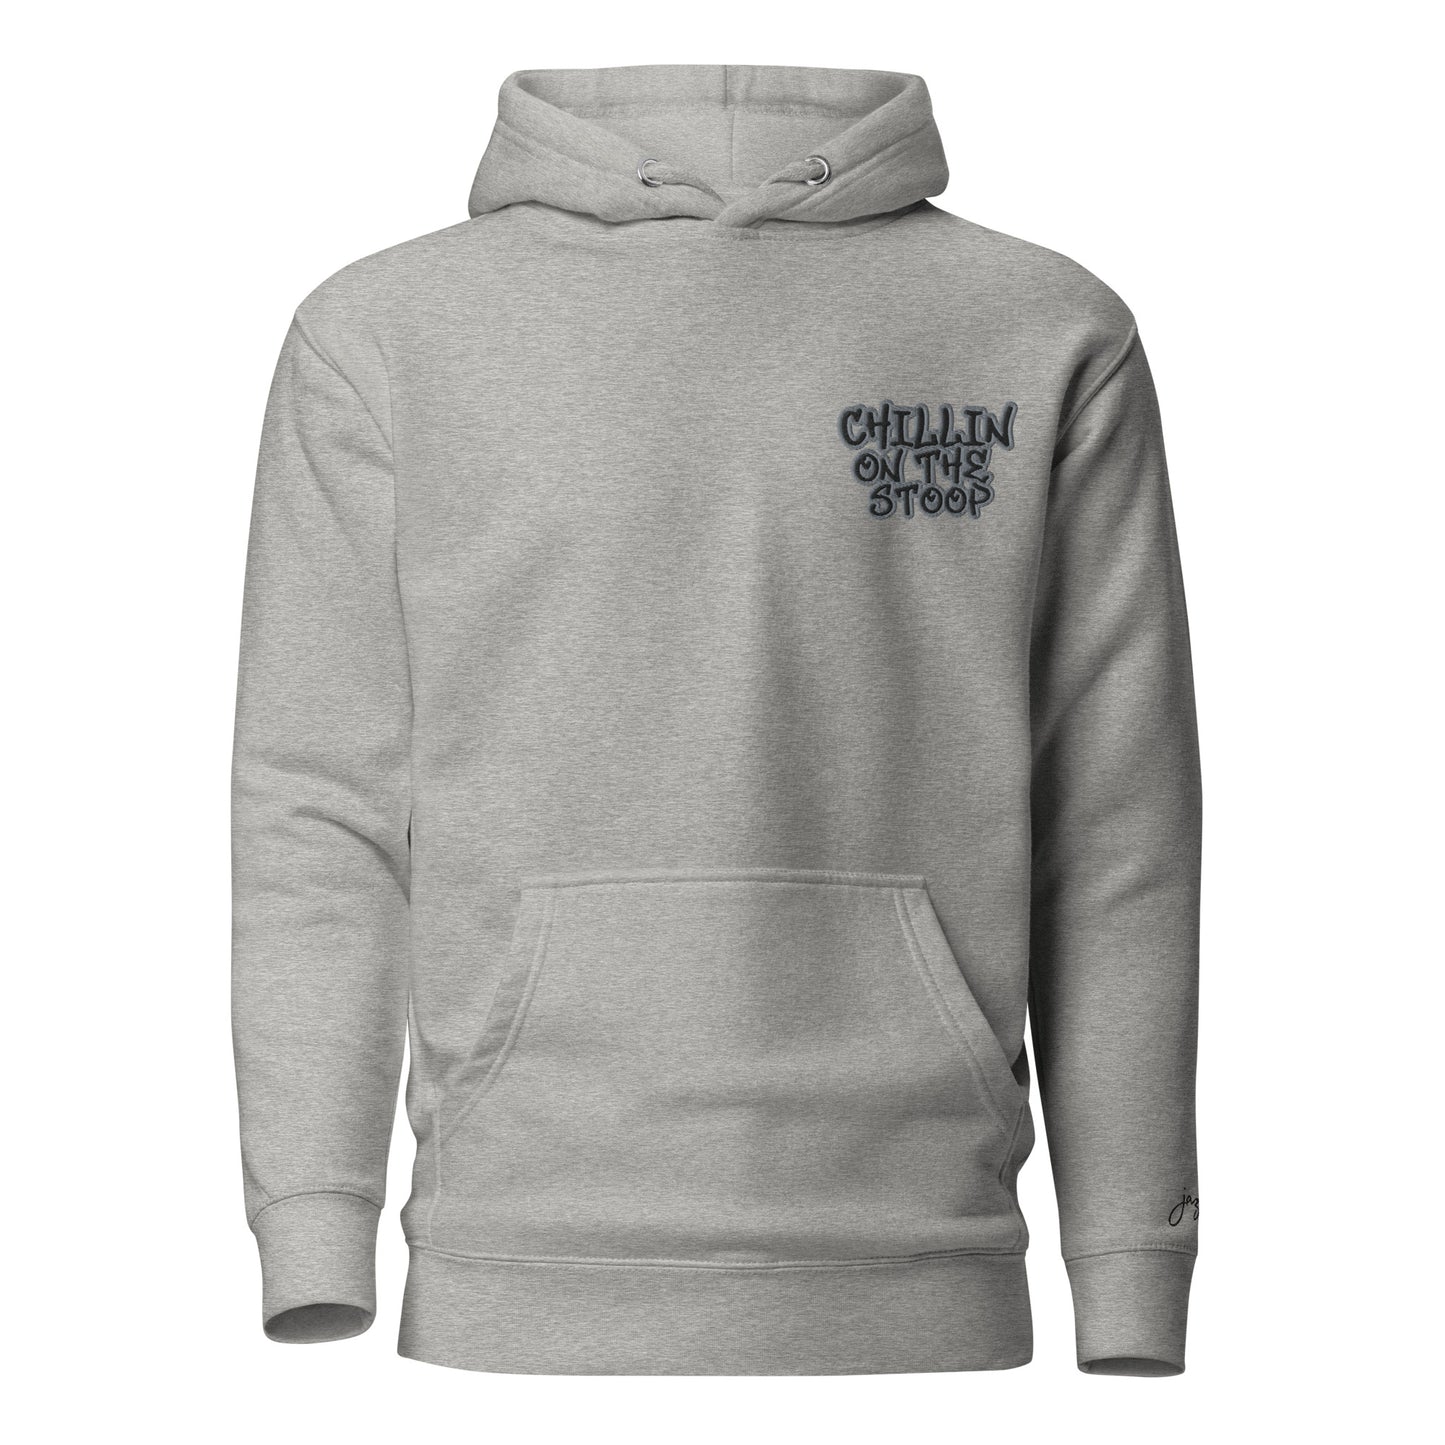 CHILLIN ON THE STOOP Stitched  Unisex Hoodie